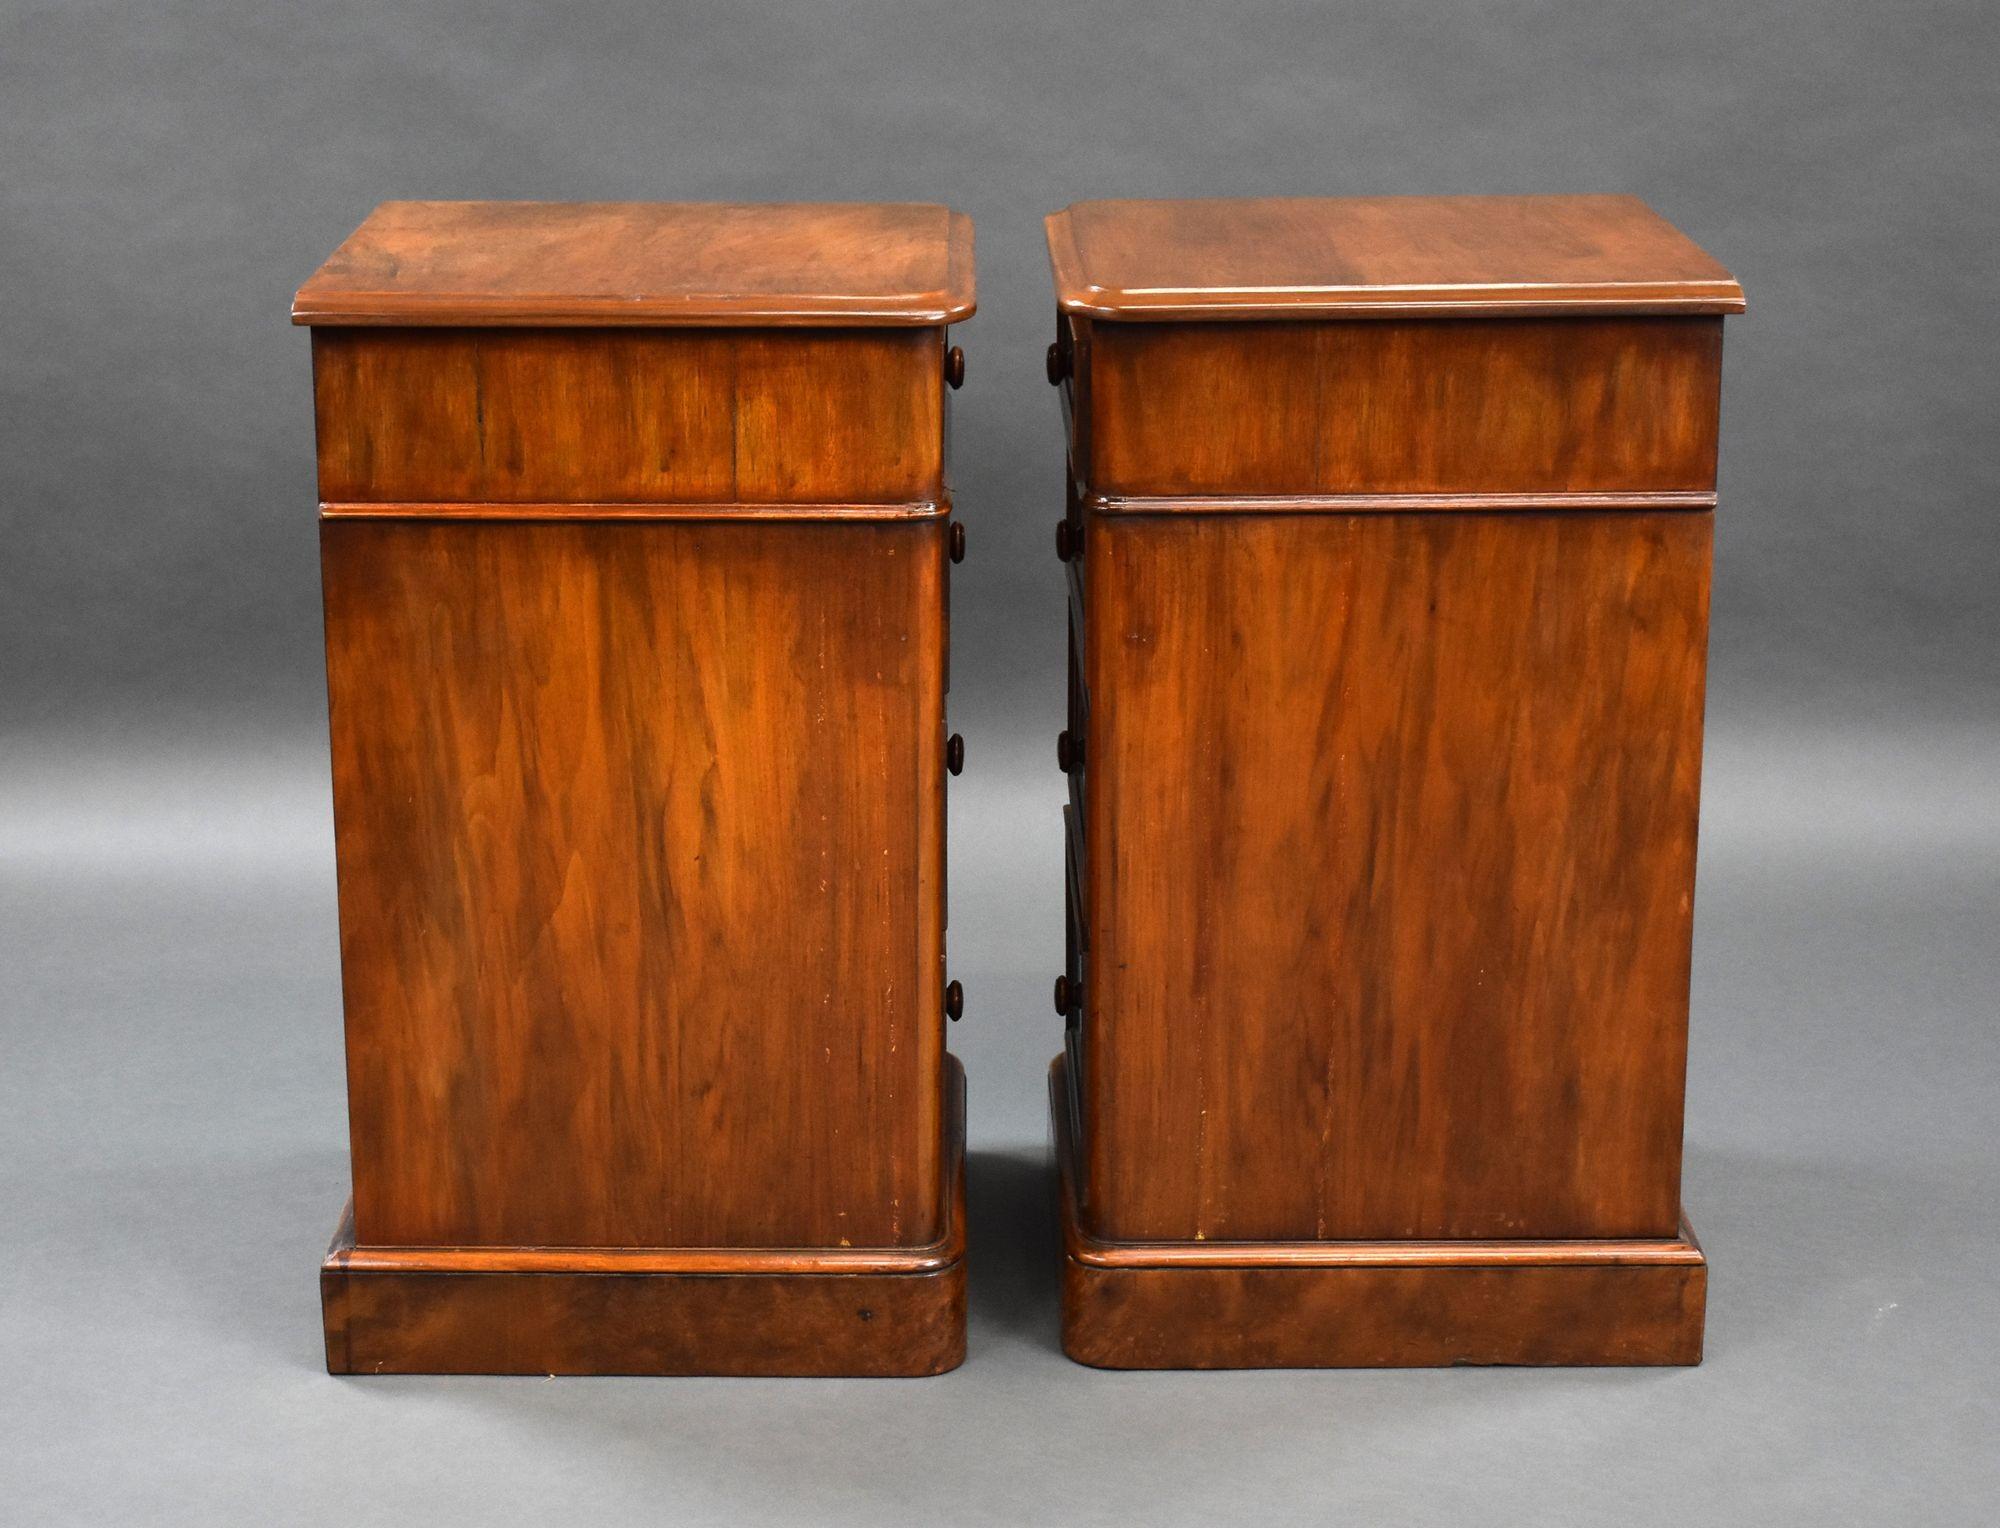 English Pair of Victorian Figured Walnut Bedside Chests